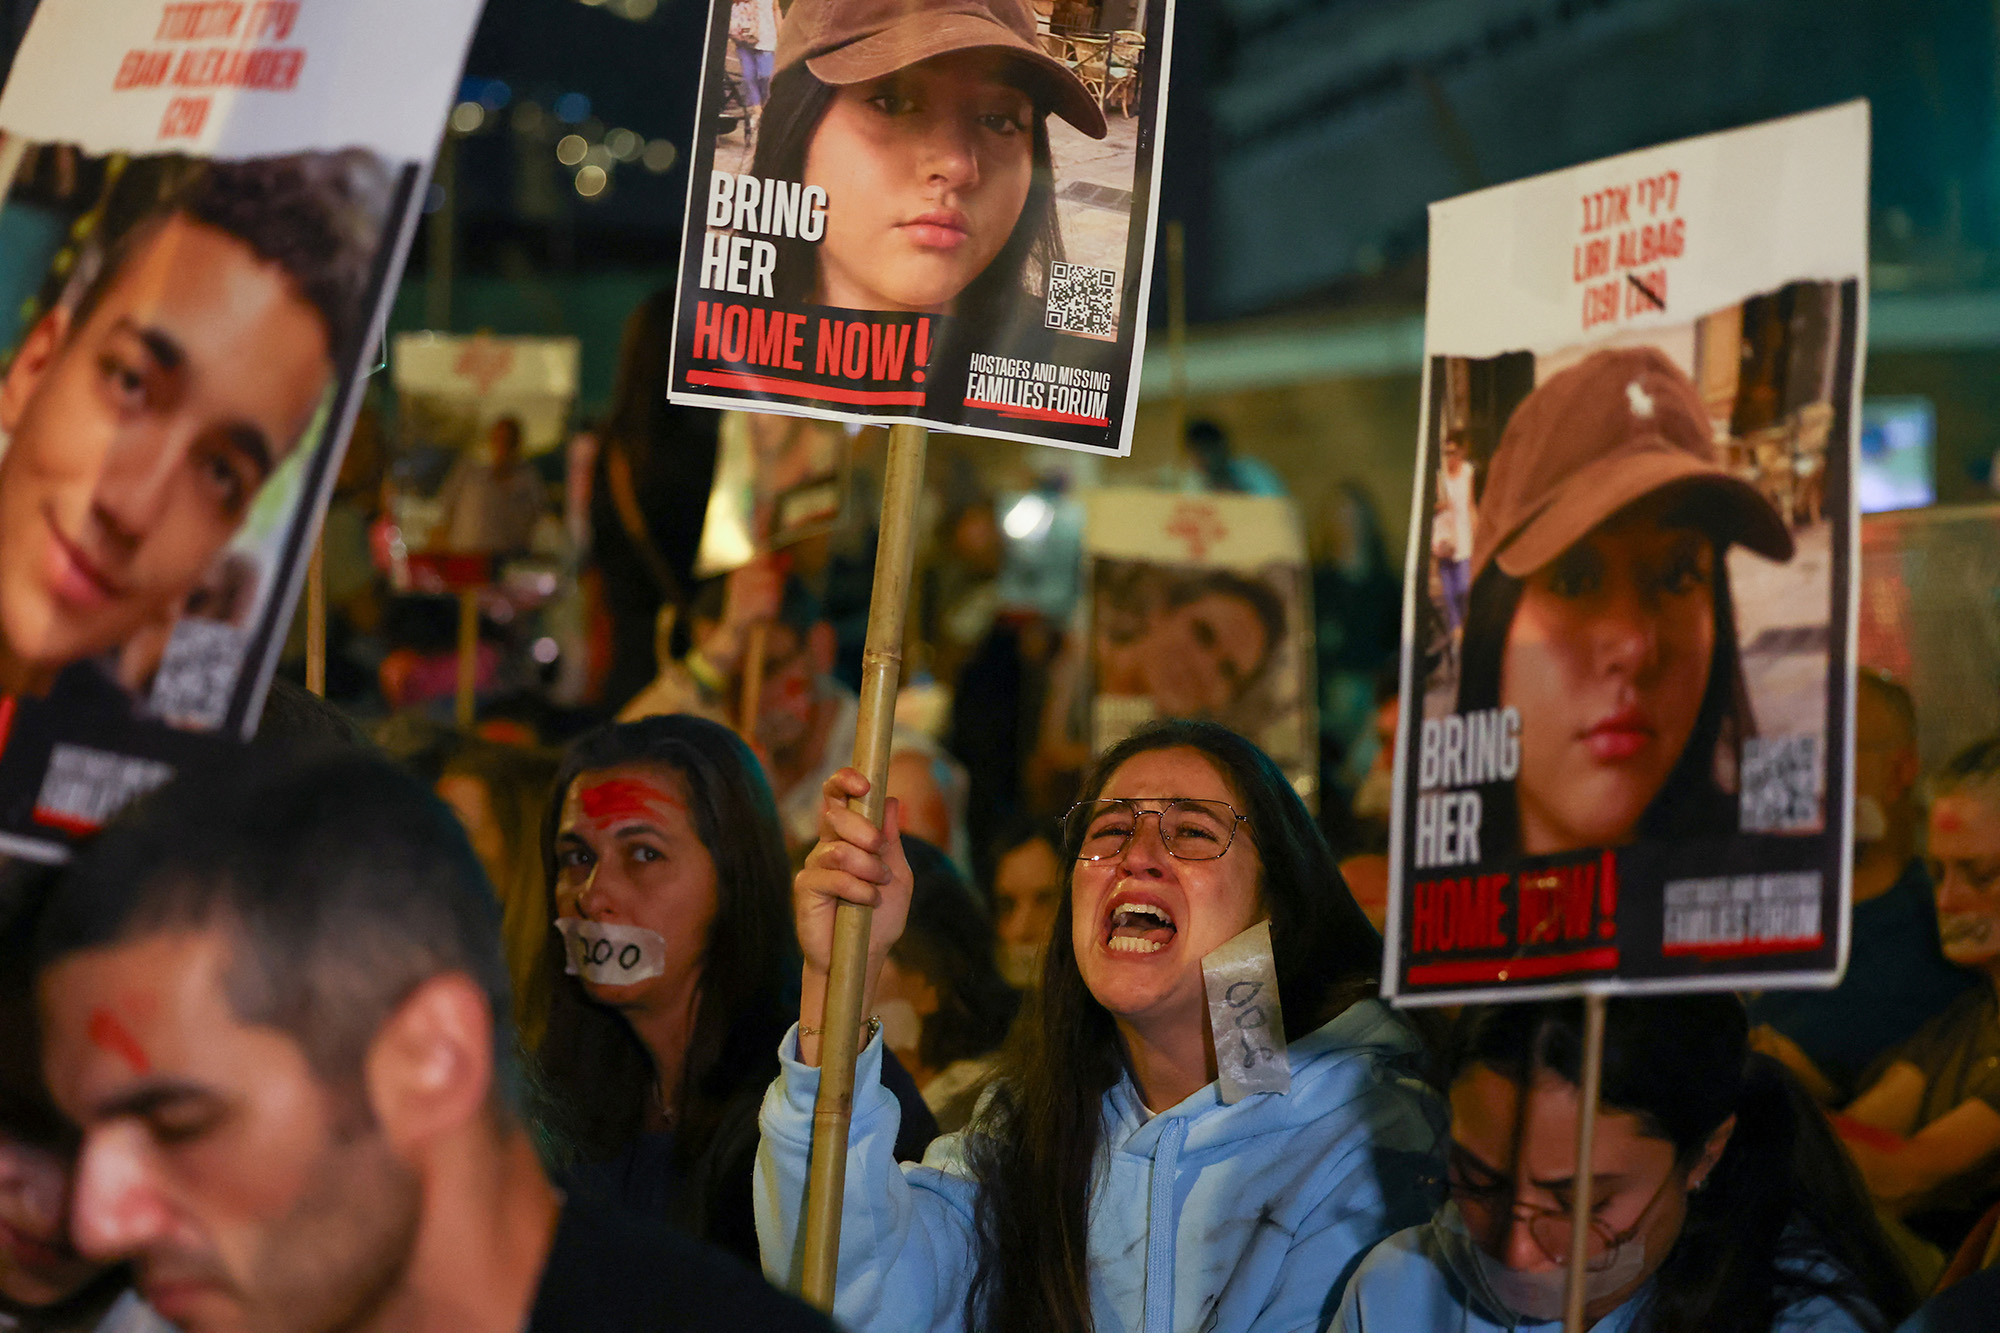 People protest to mark 200 days since the start of the conflict between Israel and the Palestinian Islamist group Hamas, in Tel Aviv, Israel, on April 23.